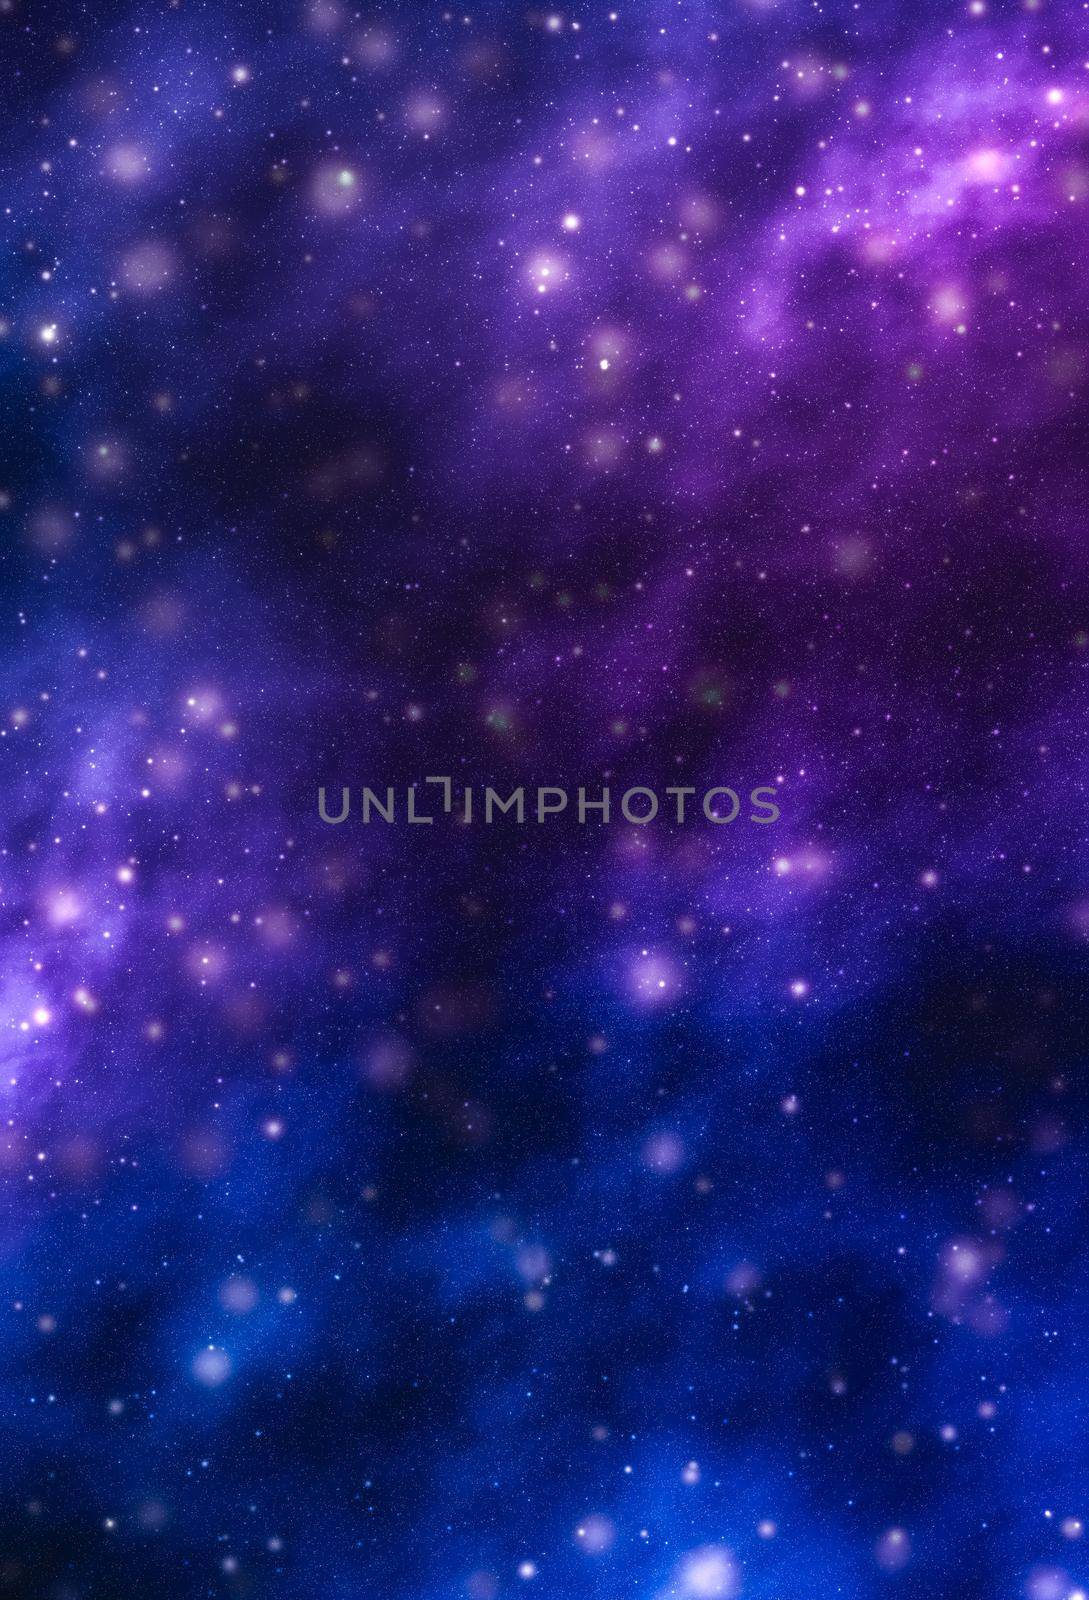 Stars, planet and galaxy in cosmos universe, space and time travel science background by Anneleven